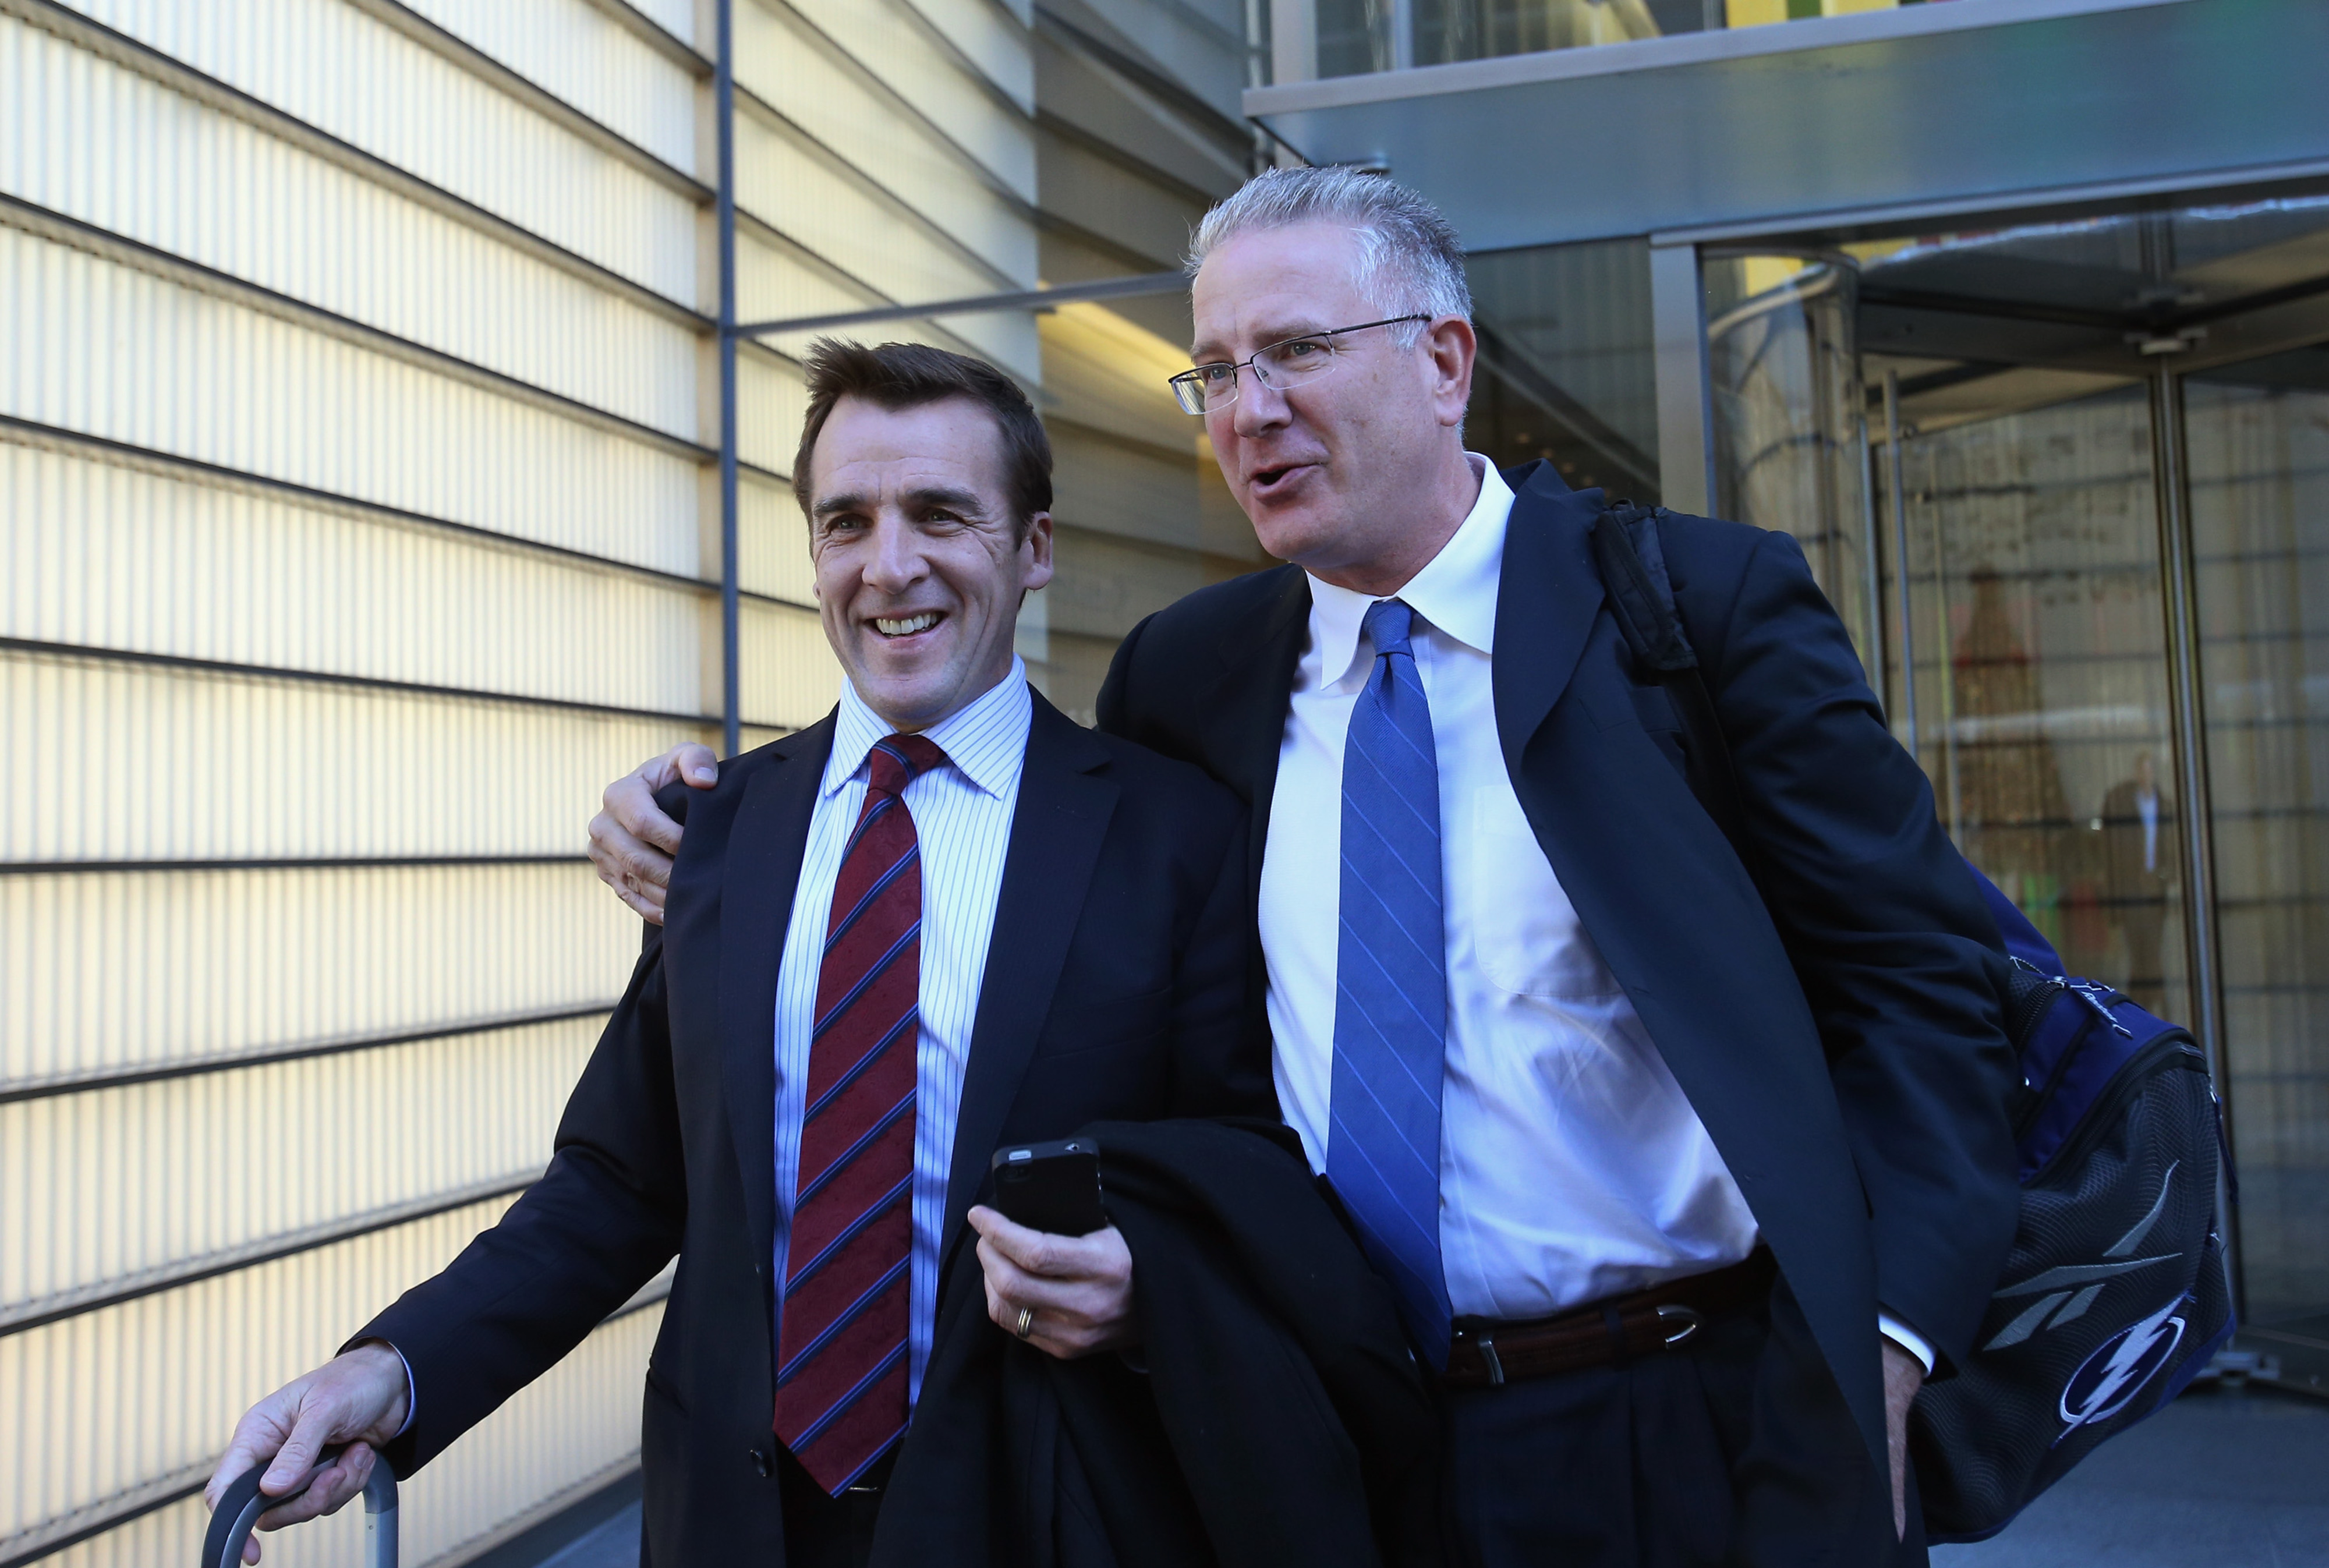 Capitals General Manager George McPhee (left) leaves Wednesday's NHL Board of Governors meeting in New York alongside Lightning CEO Tod Leiweke